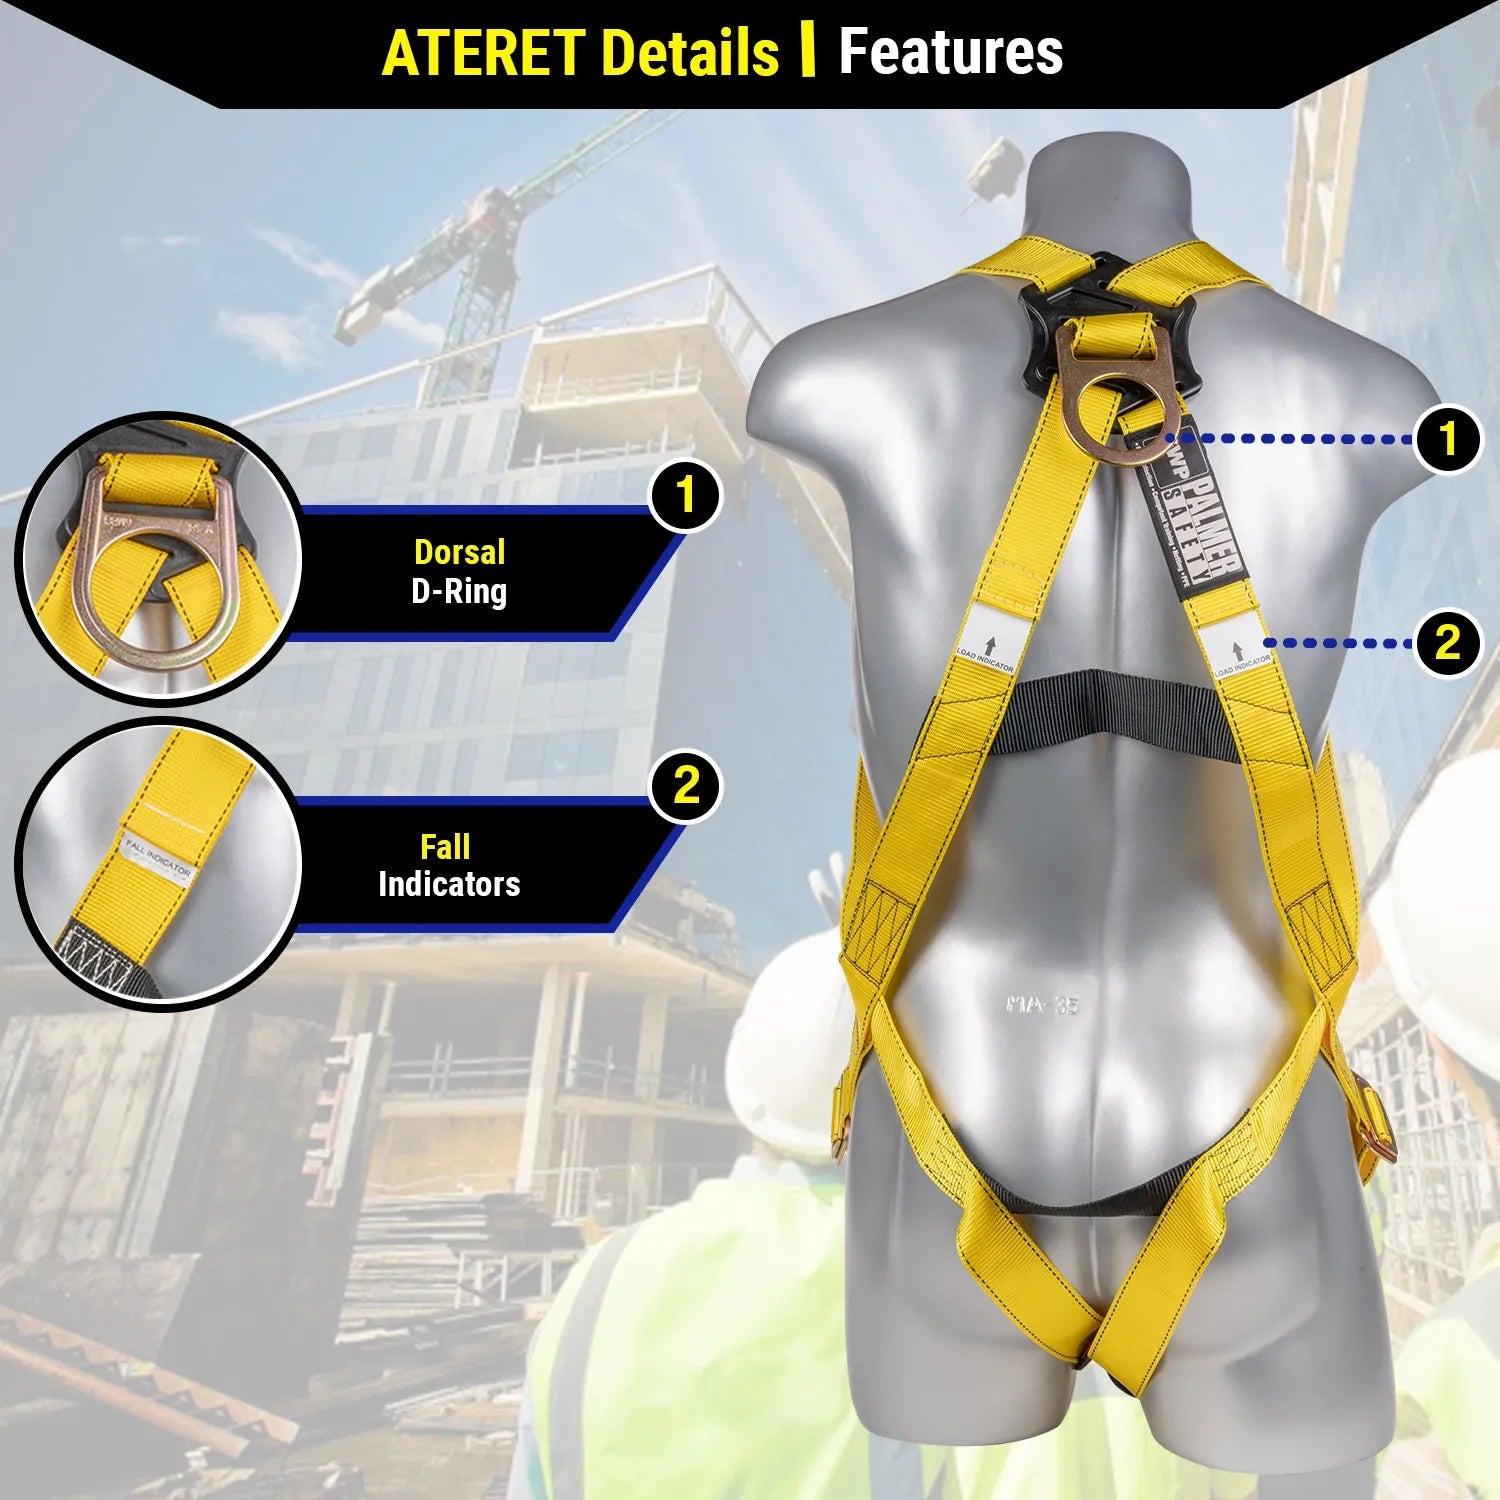 Construction Safety Harness 3 Point Pass-Thru Legs, Back D-Ring, Yellow - Defender Safety